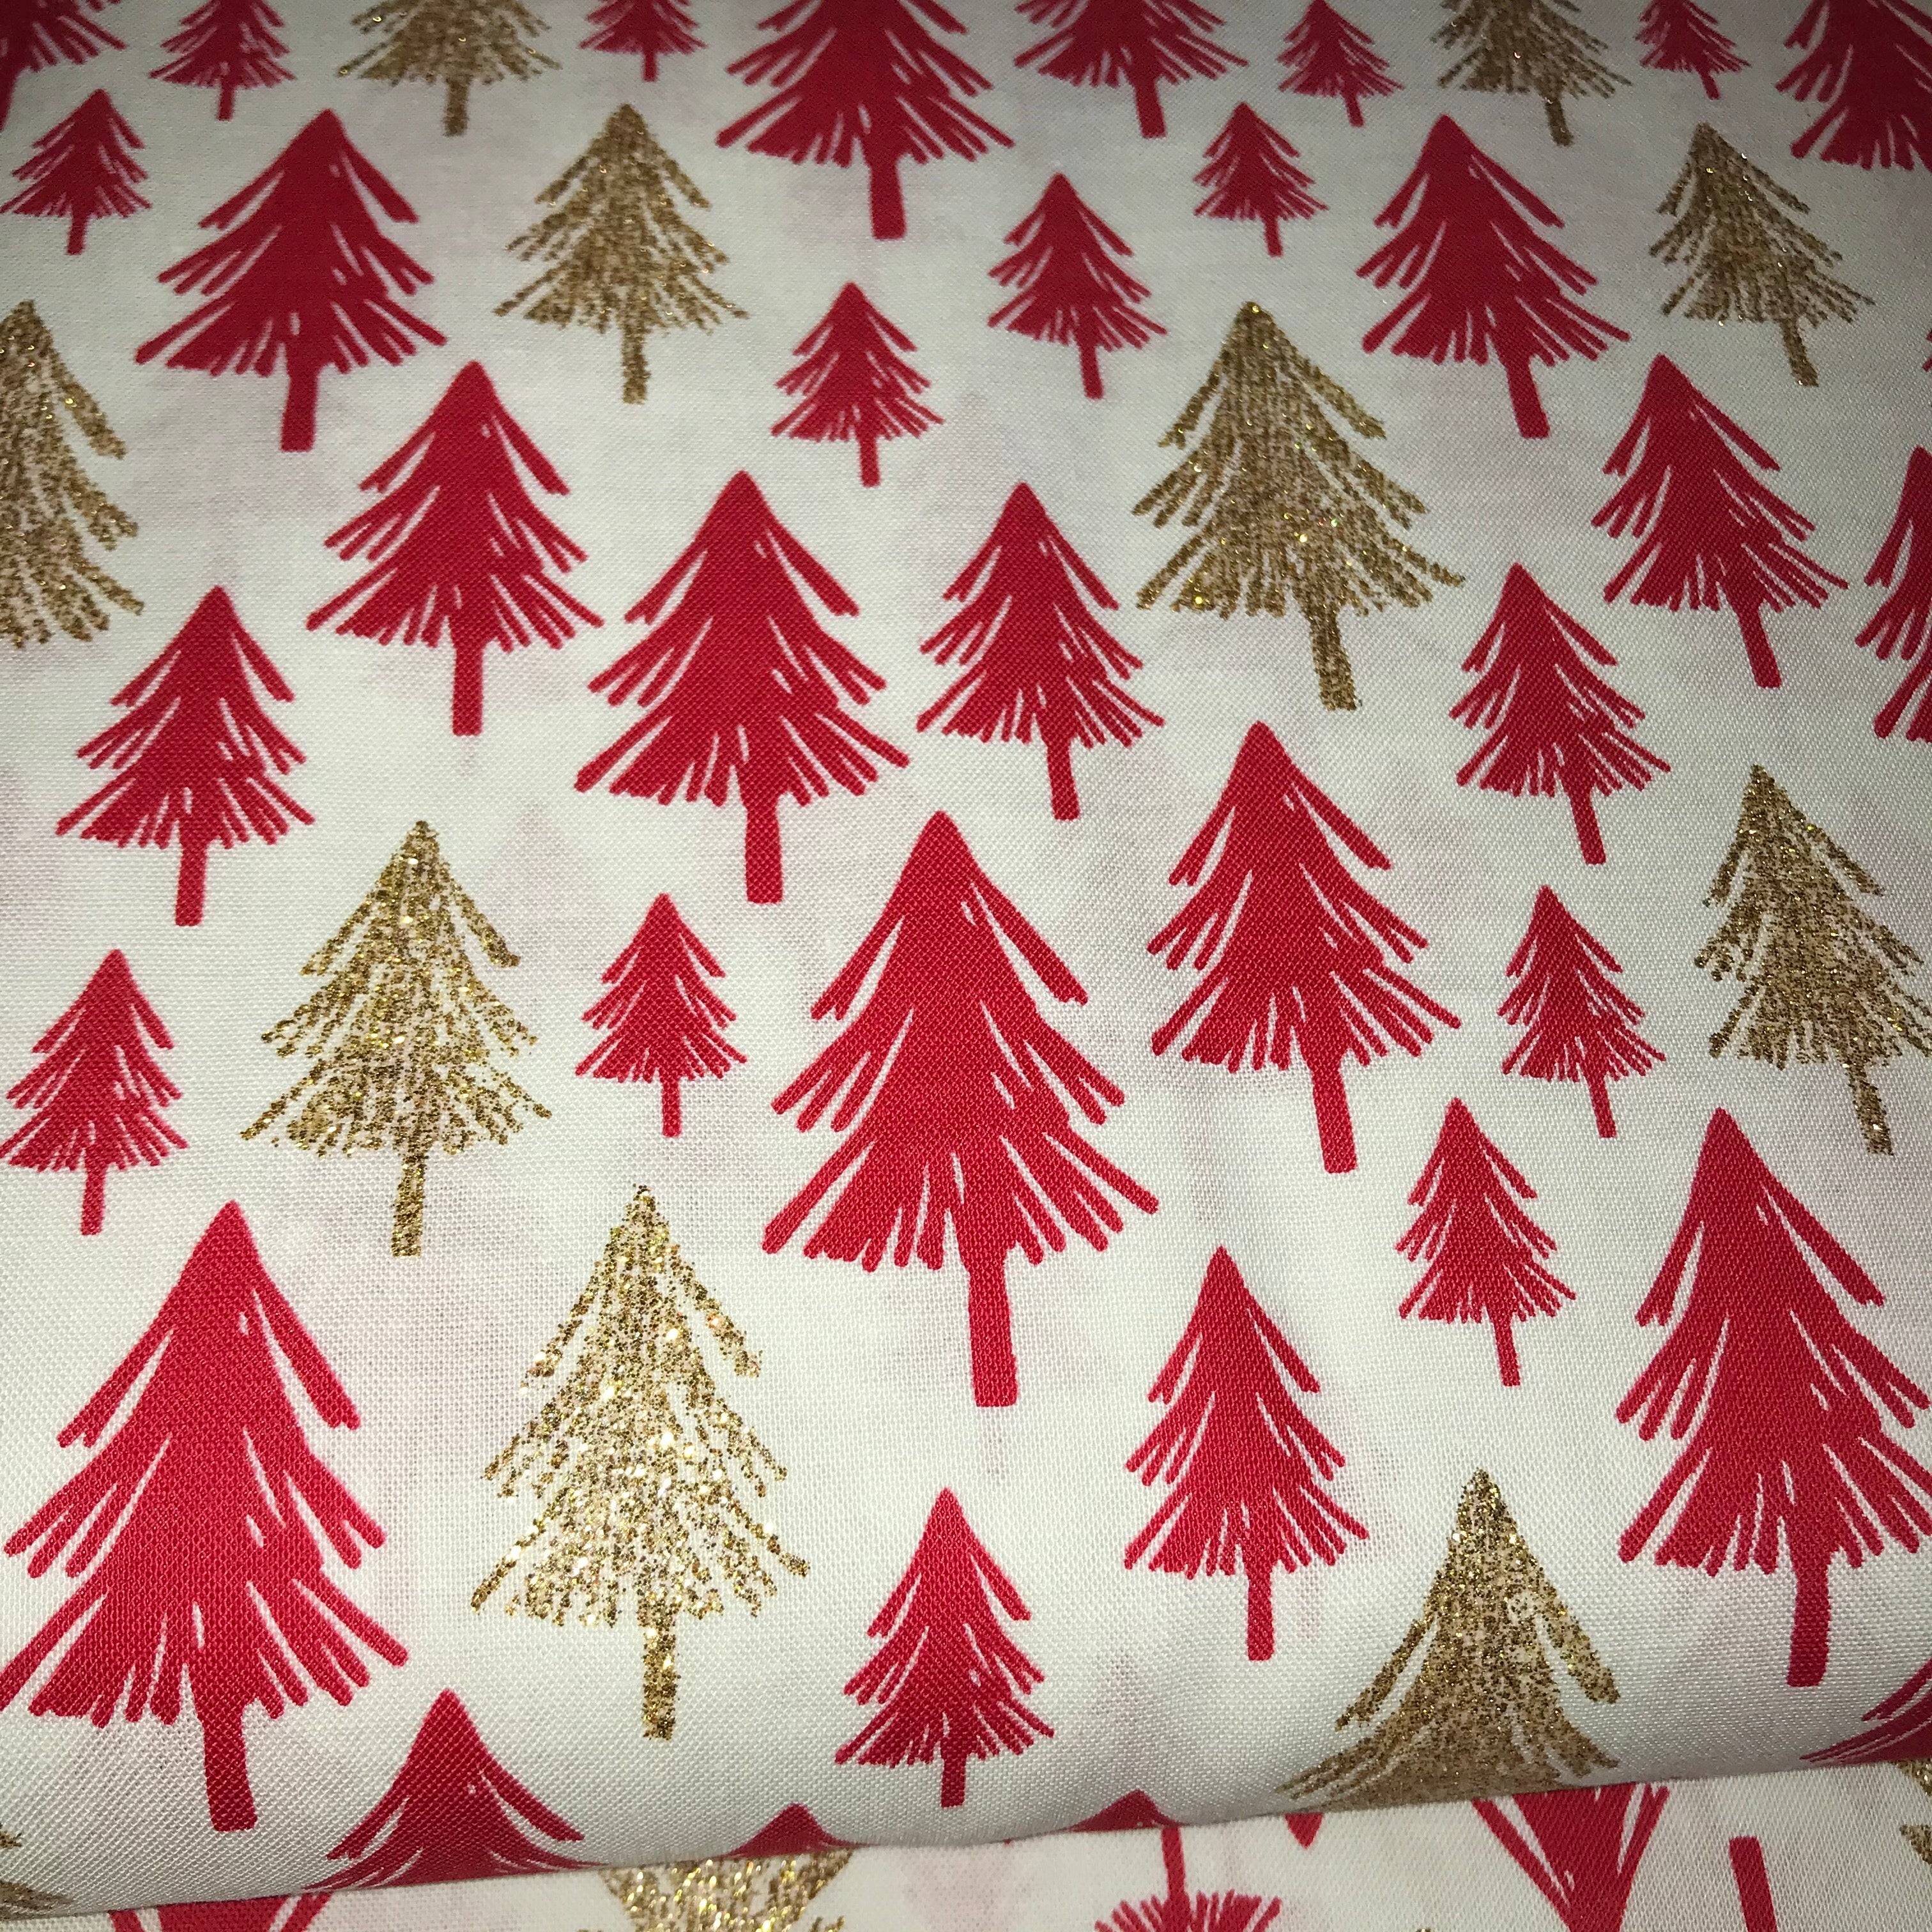 Glittery christmas trees on a cream background cotton fabric